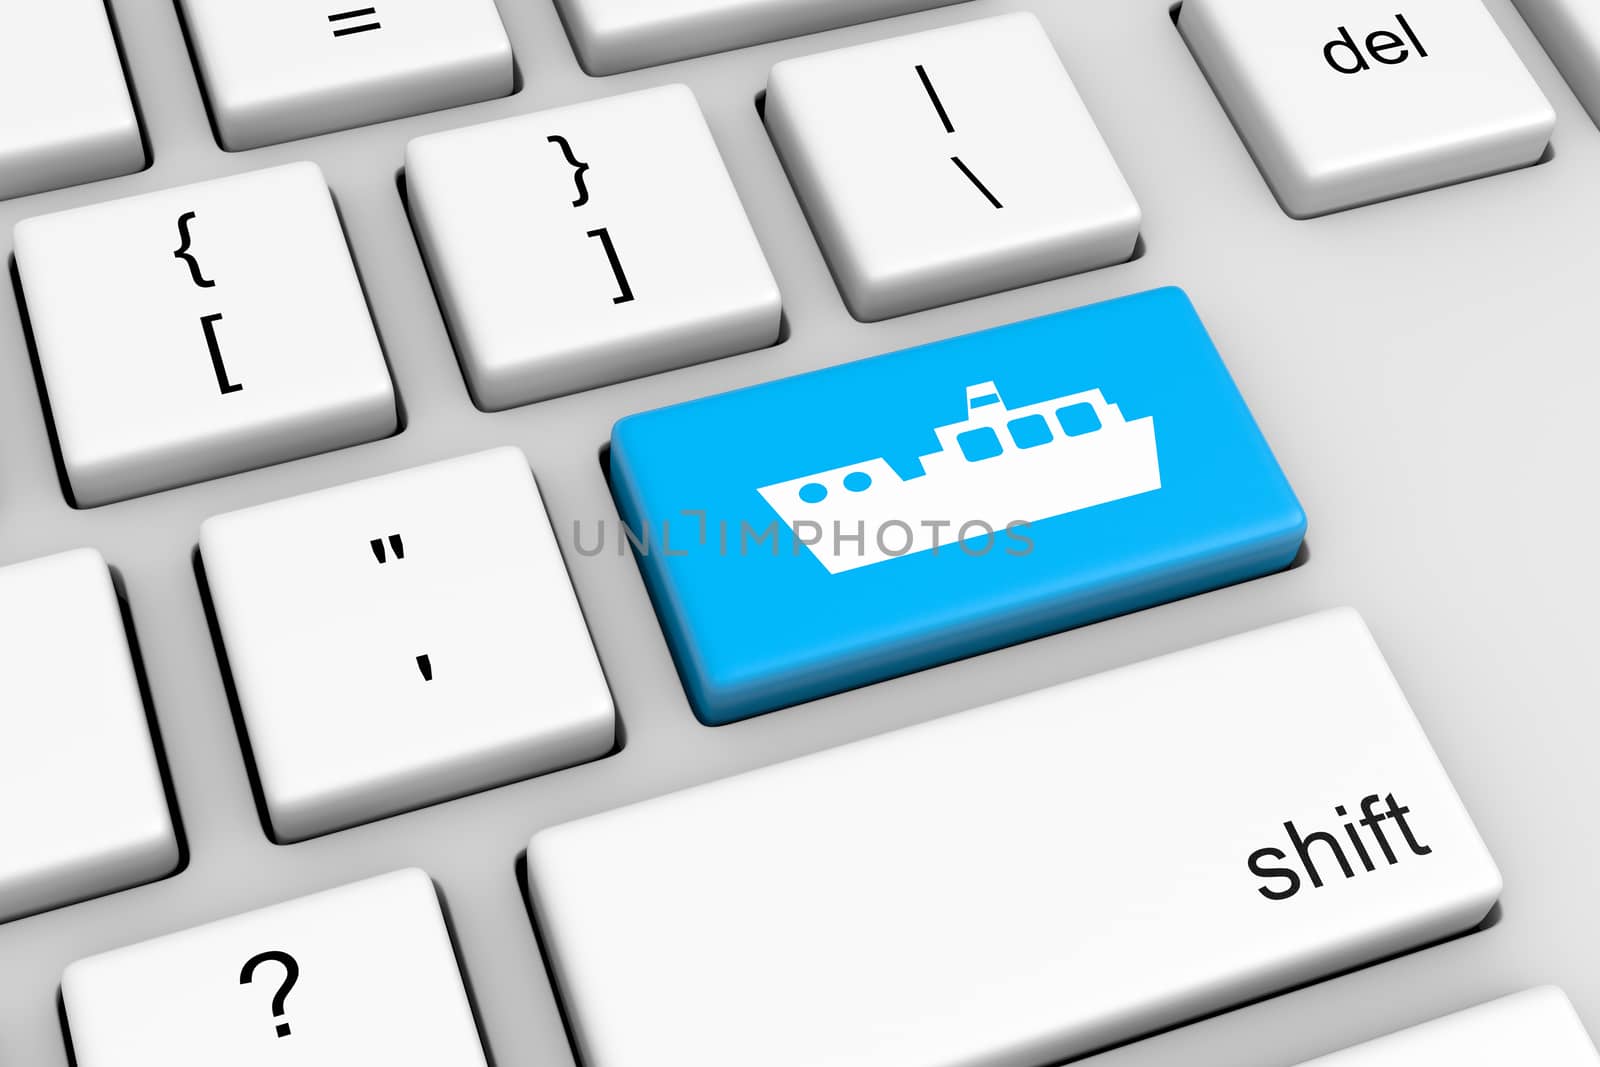 Computer Keyboard with Blue Ship Button Illustration